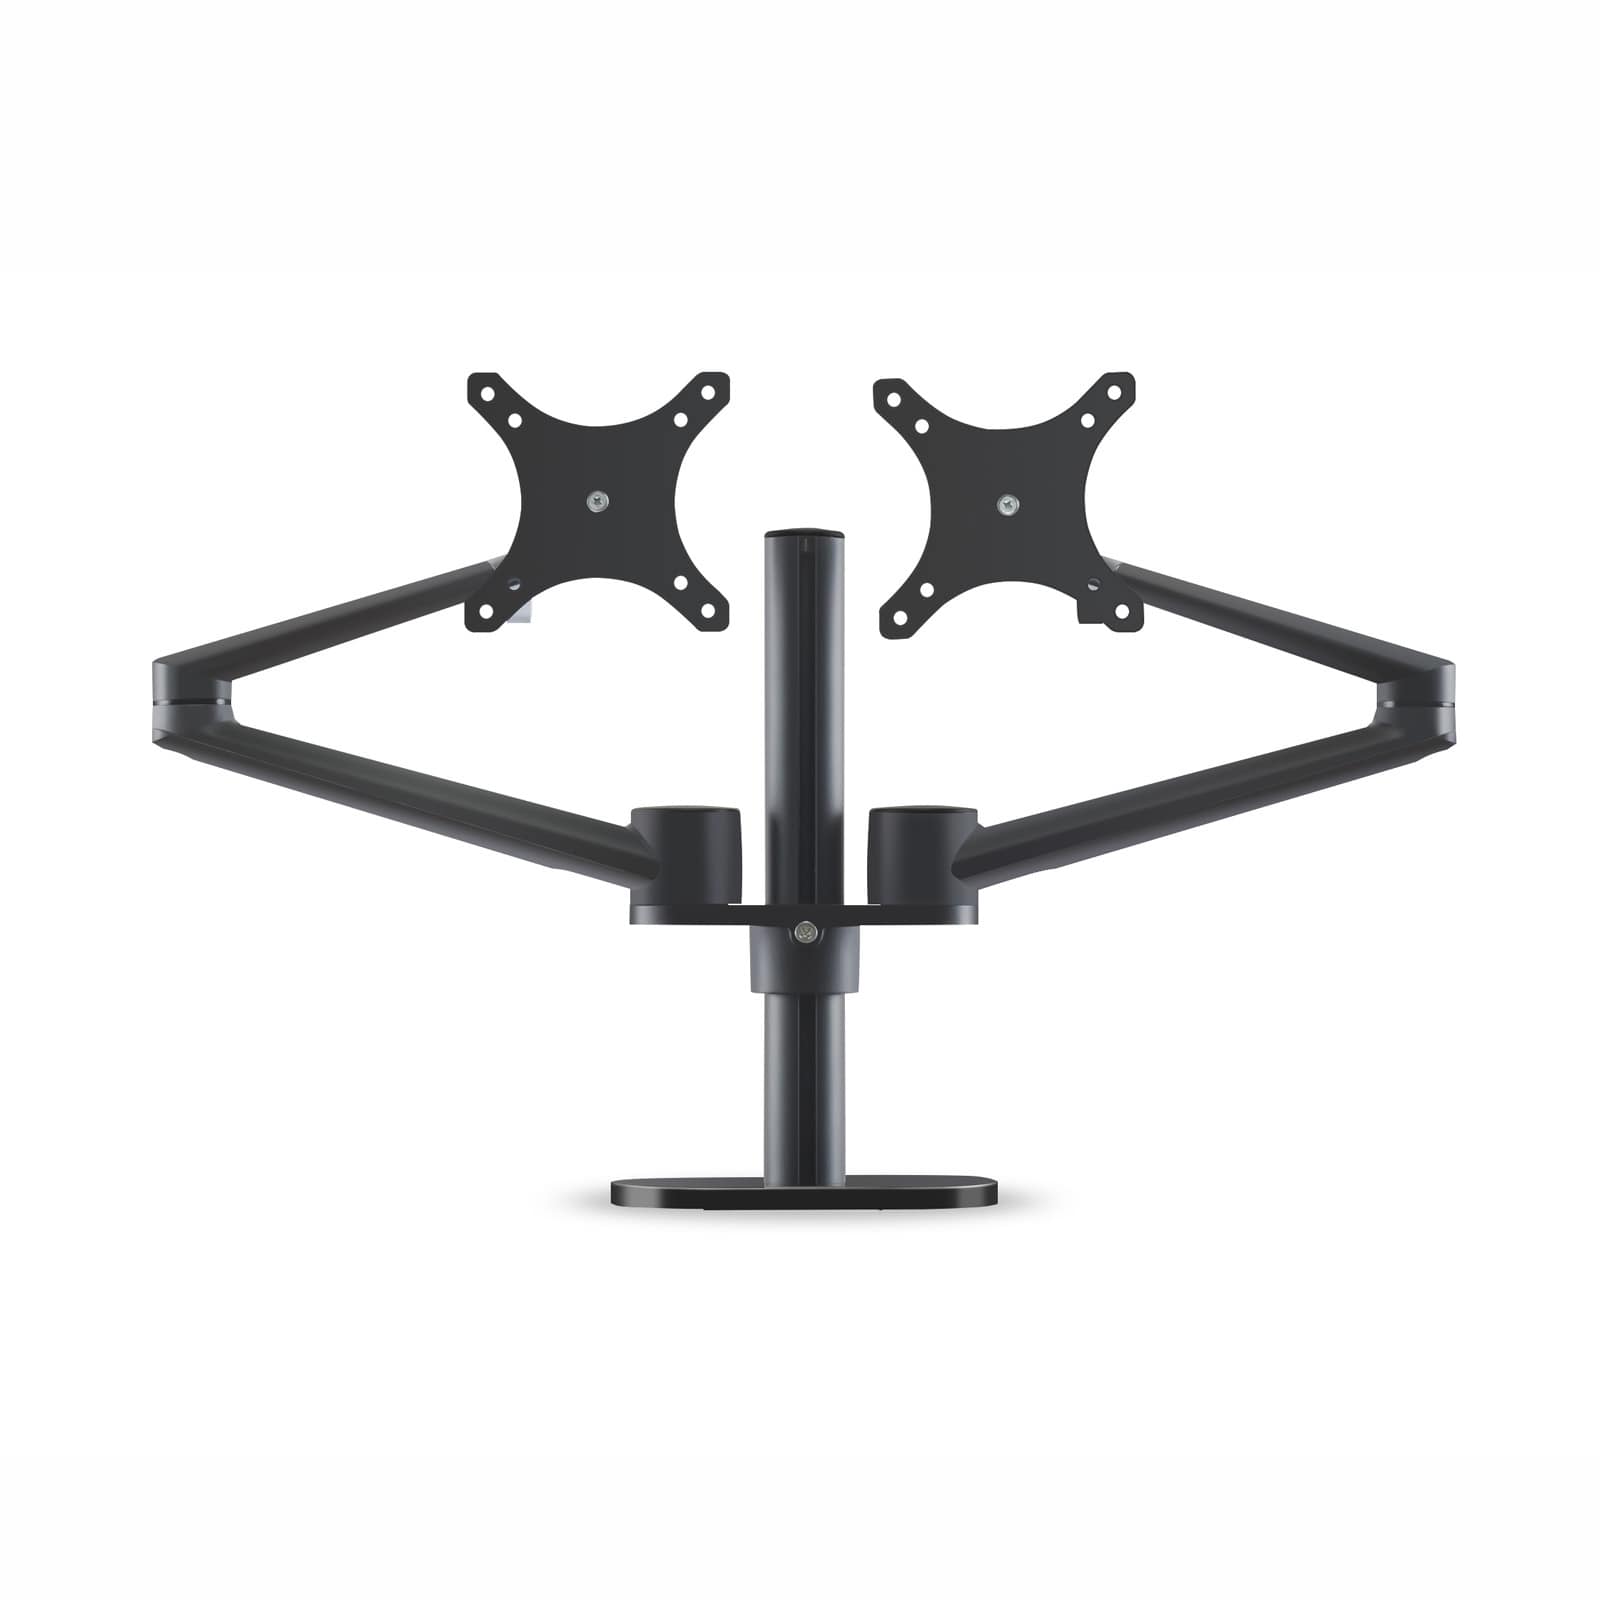 Double arm stand for OPE-19 monitors